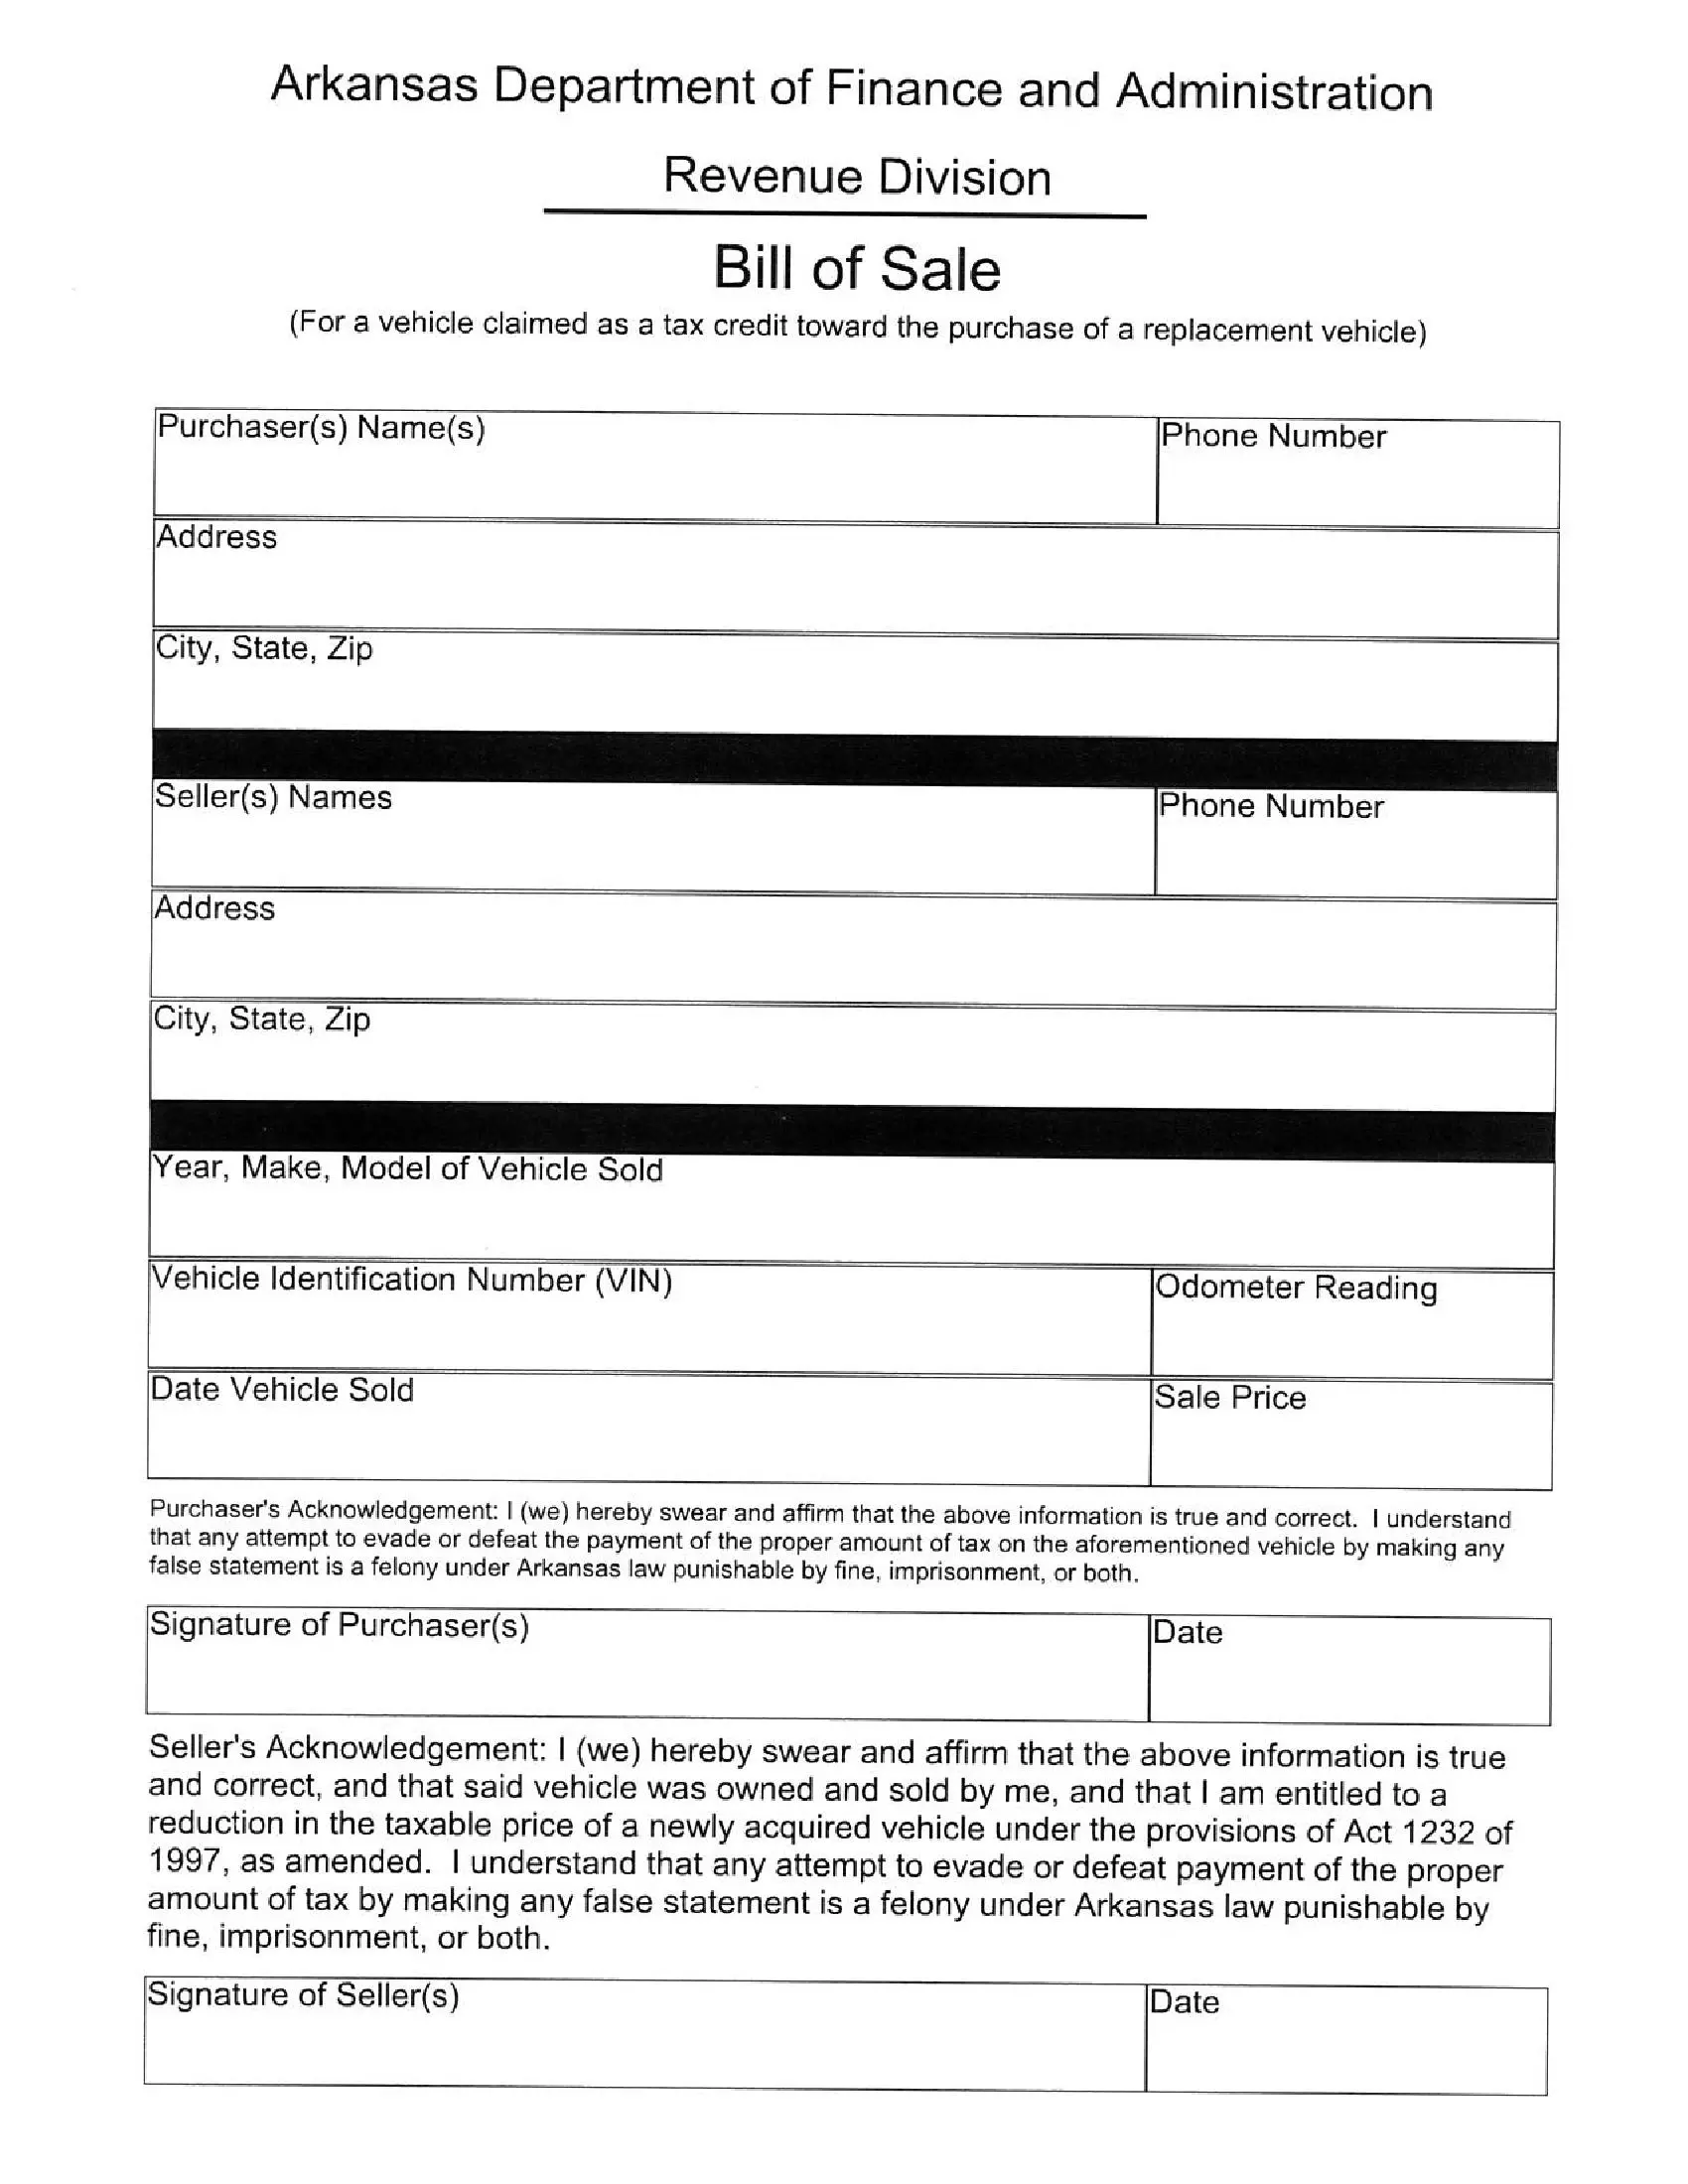 Bill of Sale (Credit for Vehicle Sold)